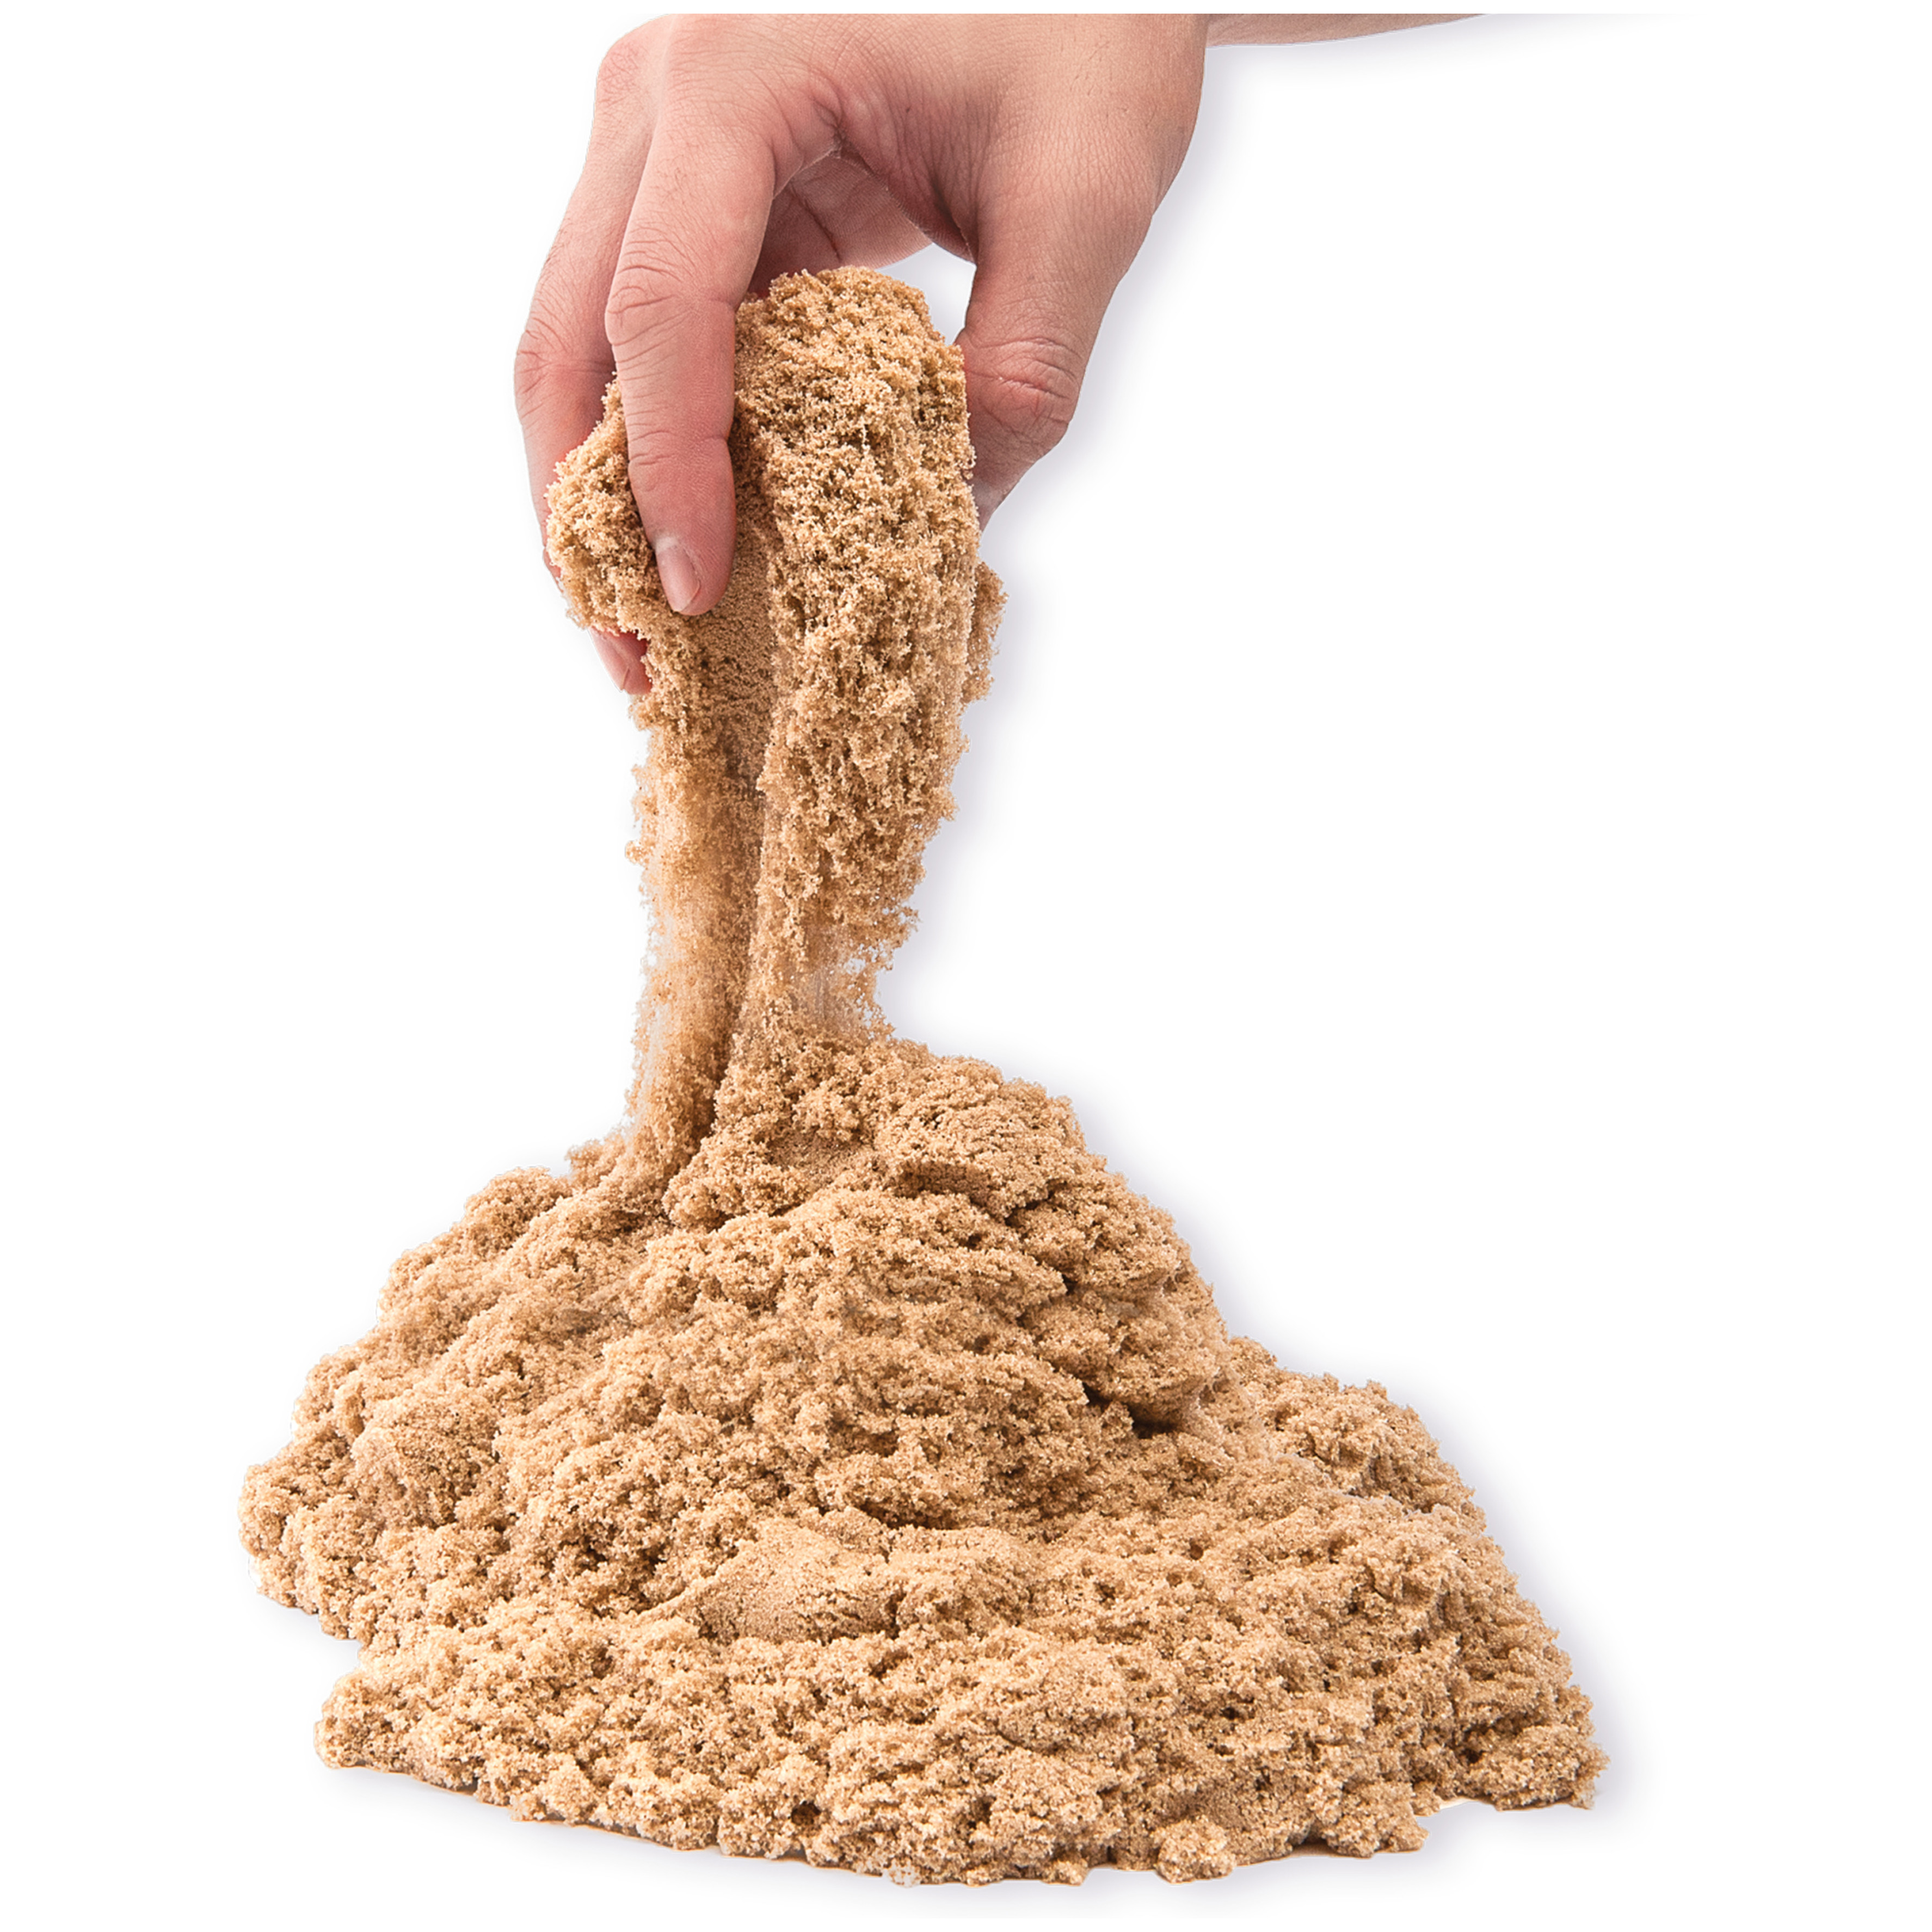 Kinetic Sand Beach Sand Kingdom Playset with 3lbs of Beach Sand, includes Molds and Tools, Play Sand Sensory Toys for Kids Ages 3 and up - image 5 of 9